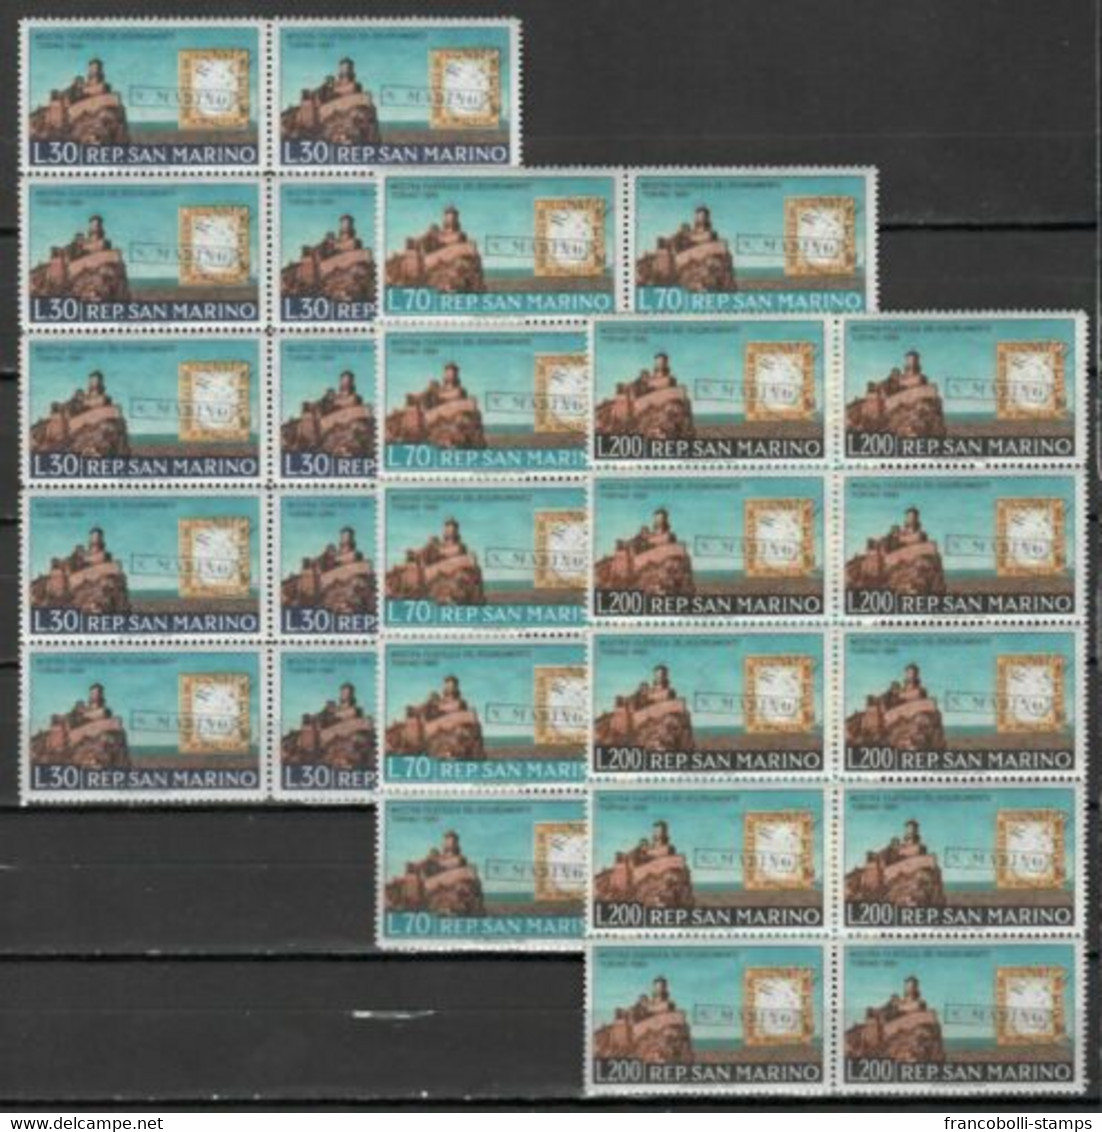 S32737 DEALER STOCK SAN MARINO MNH 1961 Risorgimento Stamps On Stamps 3v 10 SETS - Collections, Lots & Series